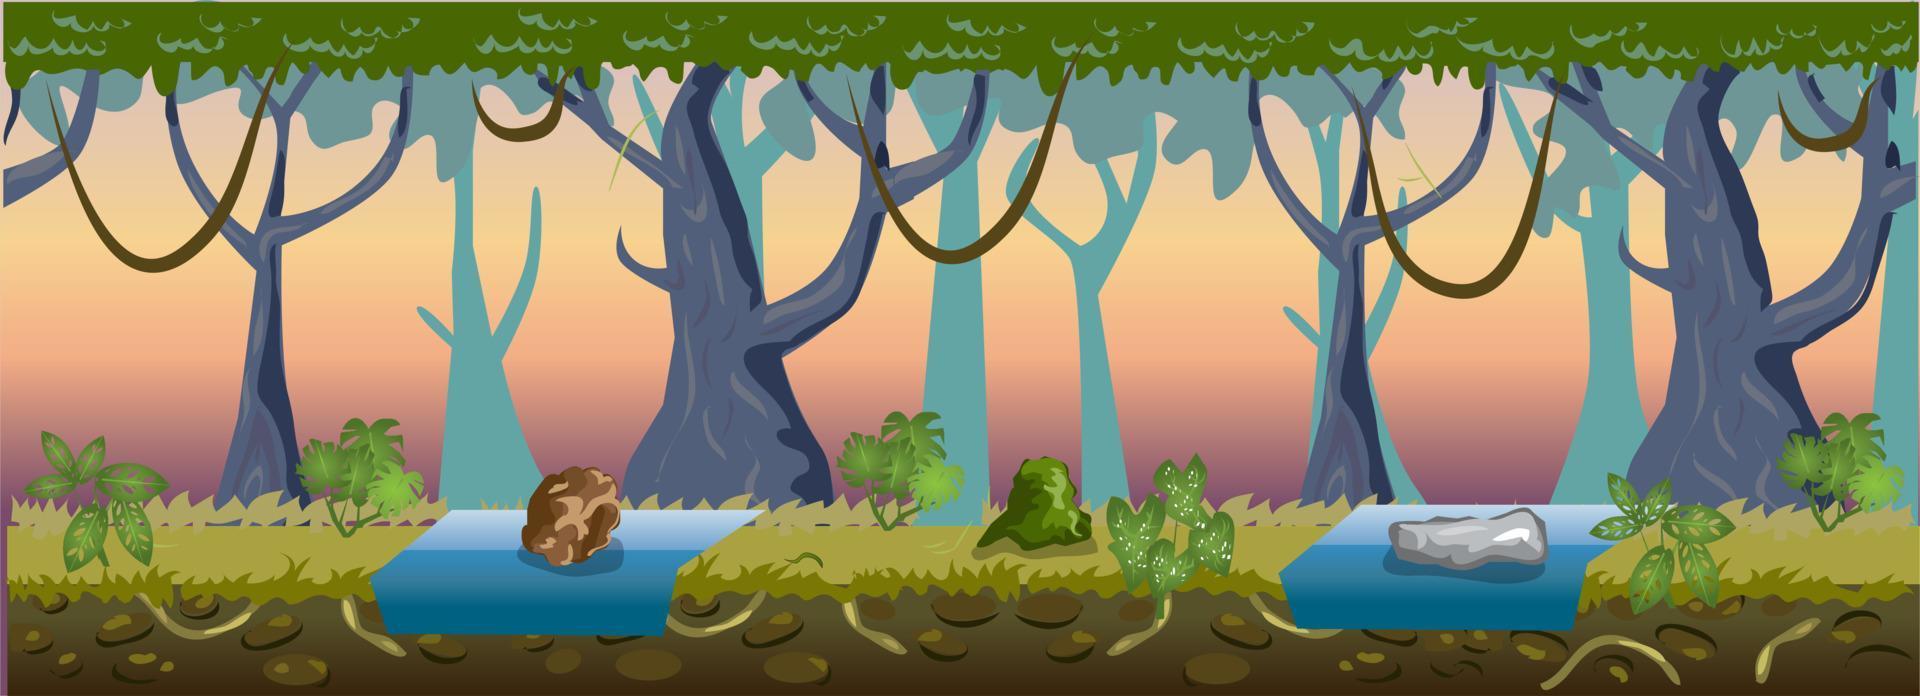 Forest Game Background vector